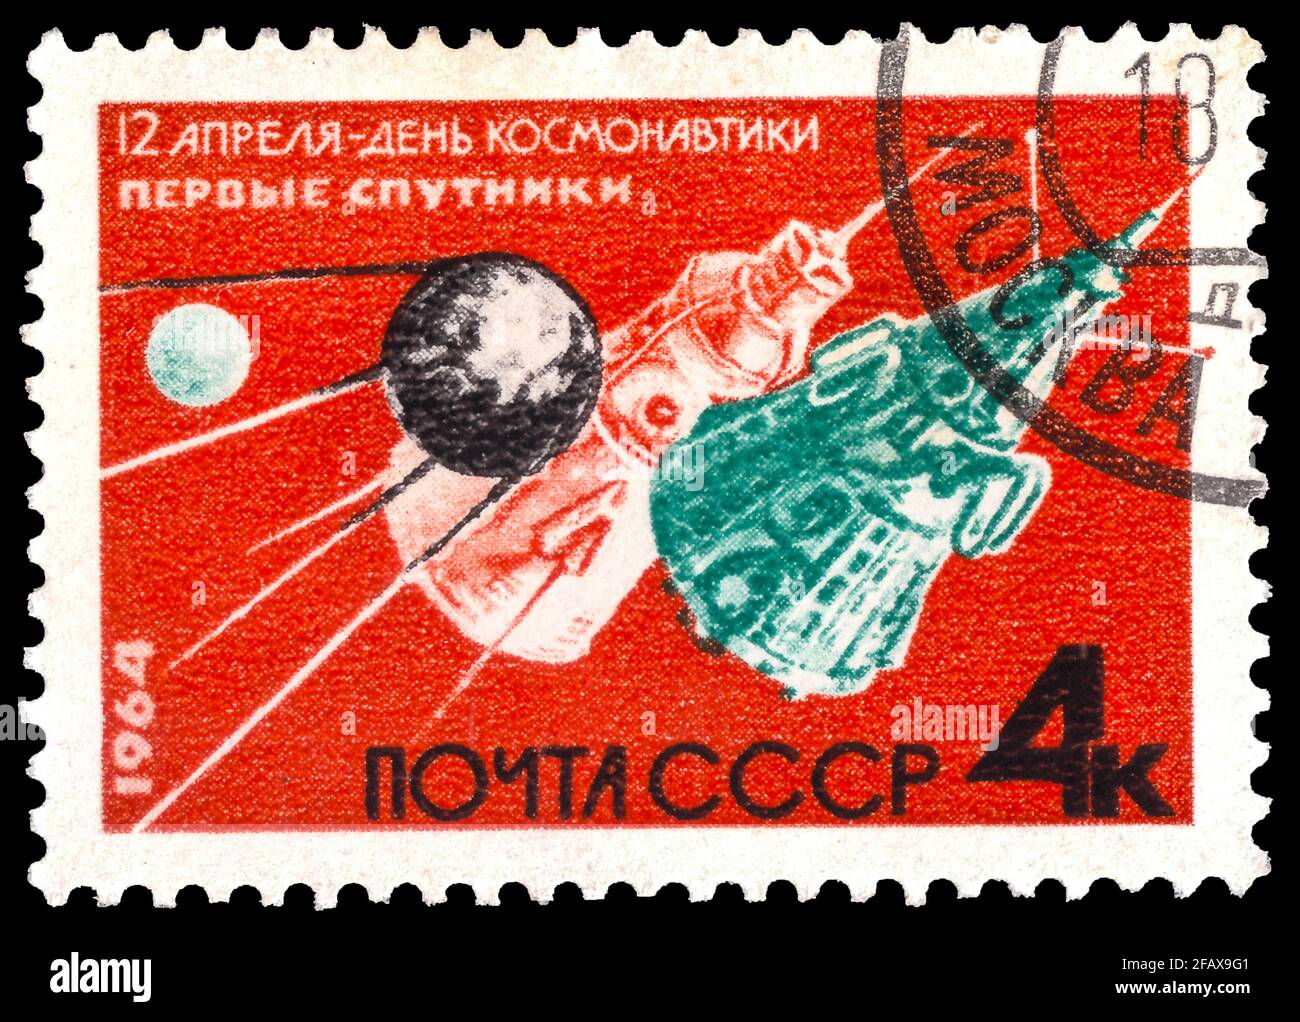 Russia - CIRCA June 20, 1964: A stamp printed by Anniv of cosmonautics day  USSR MOSCOW, : A stamp printed in USSR (Russia) shows The first sputniks  Stock Photo - Alamy